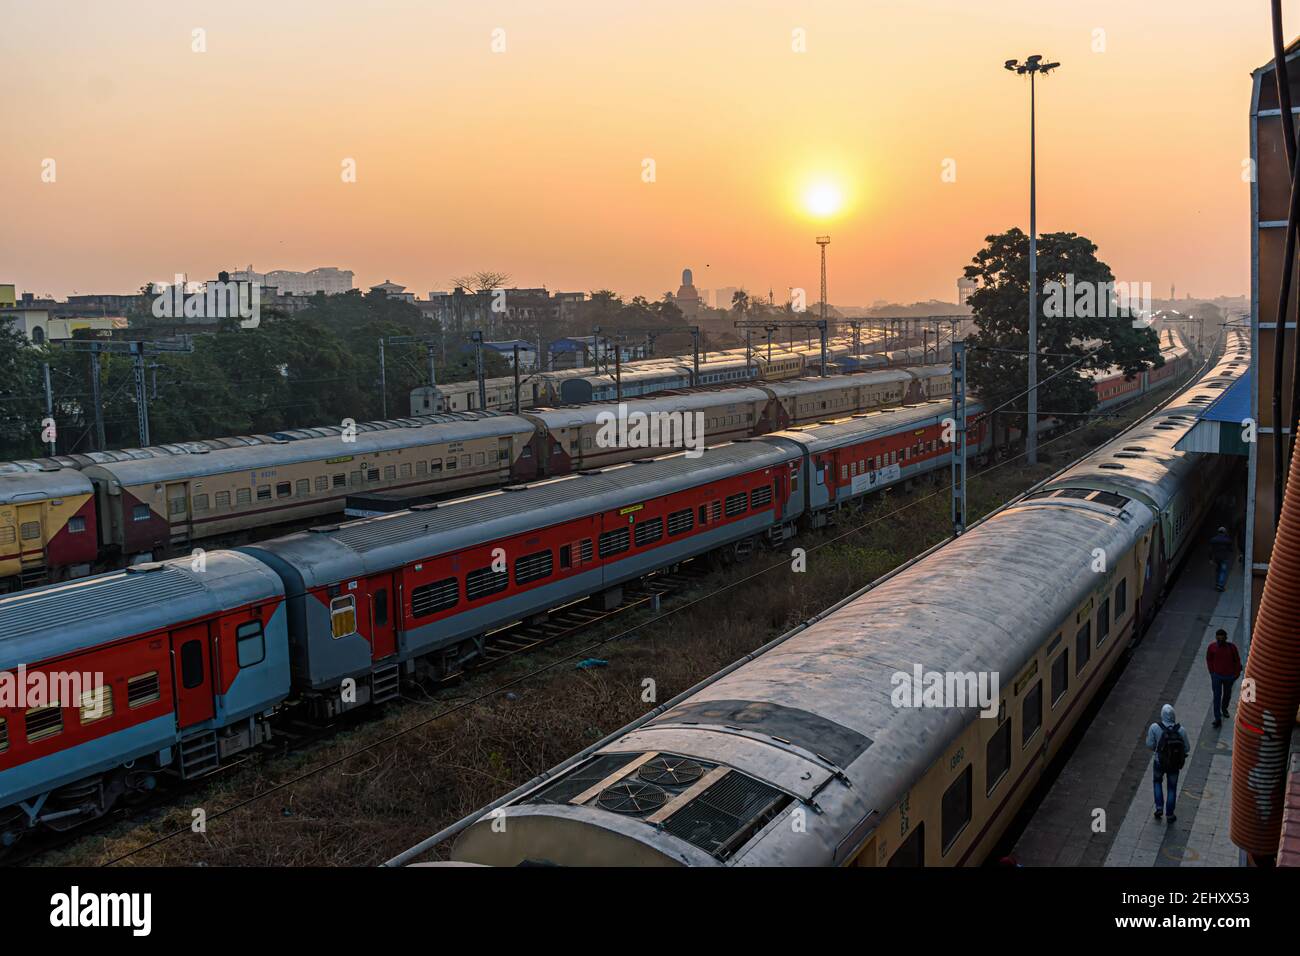 A view of express trains at a Junction Railway Station of Indian Railways system, Kolkata, India on February 2021 Stock Photo